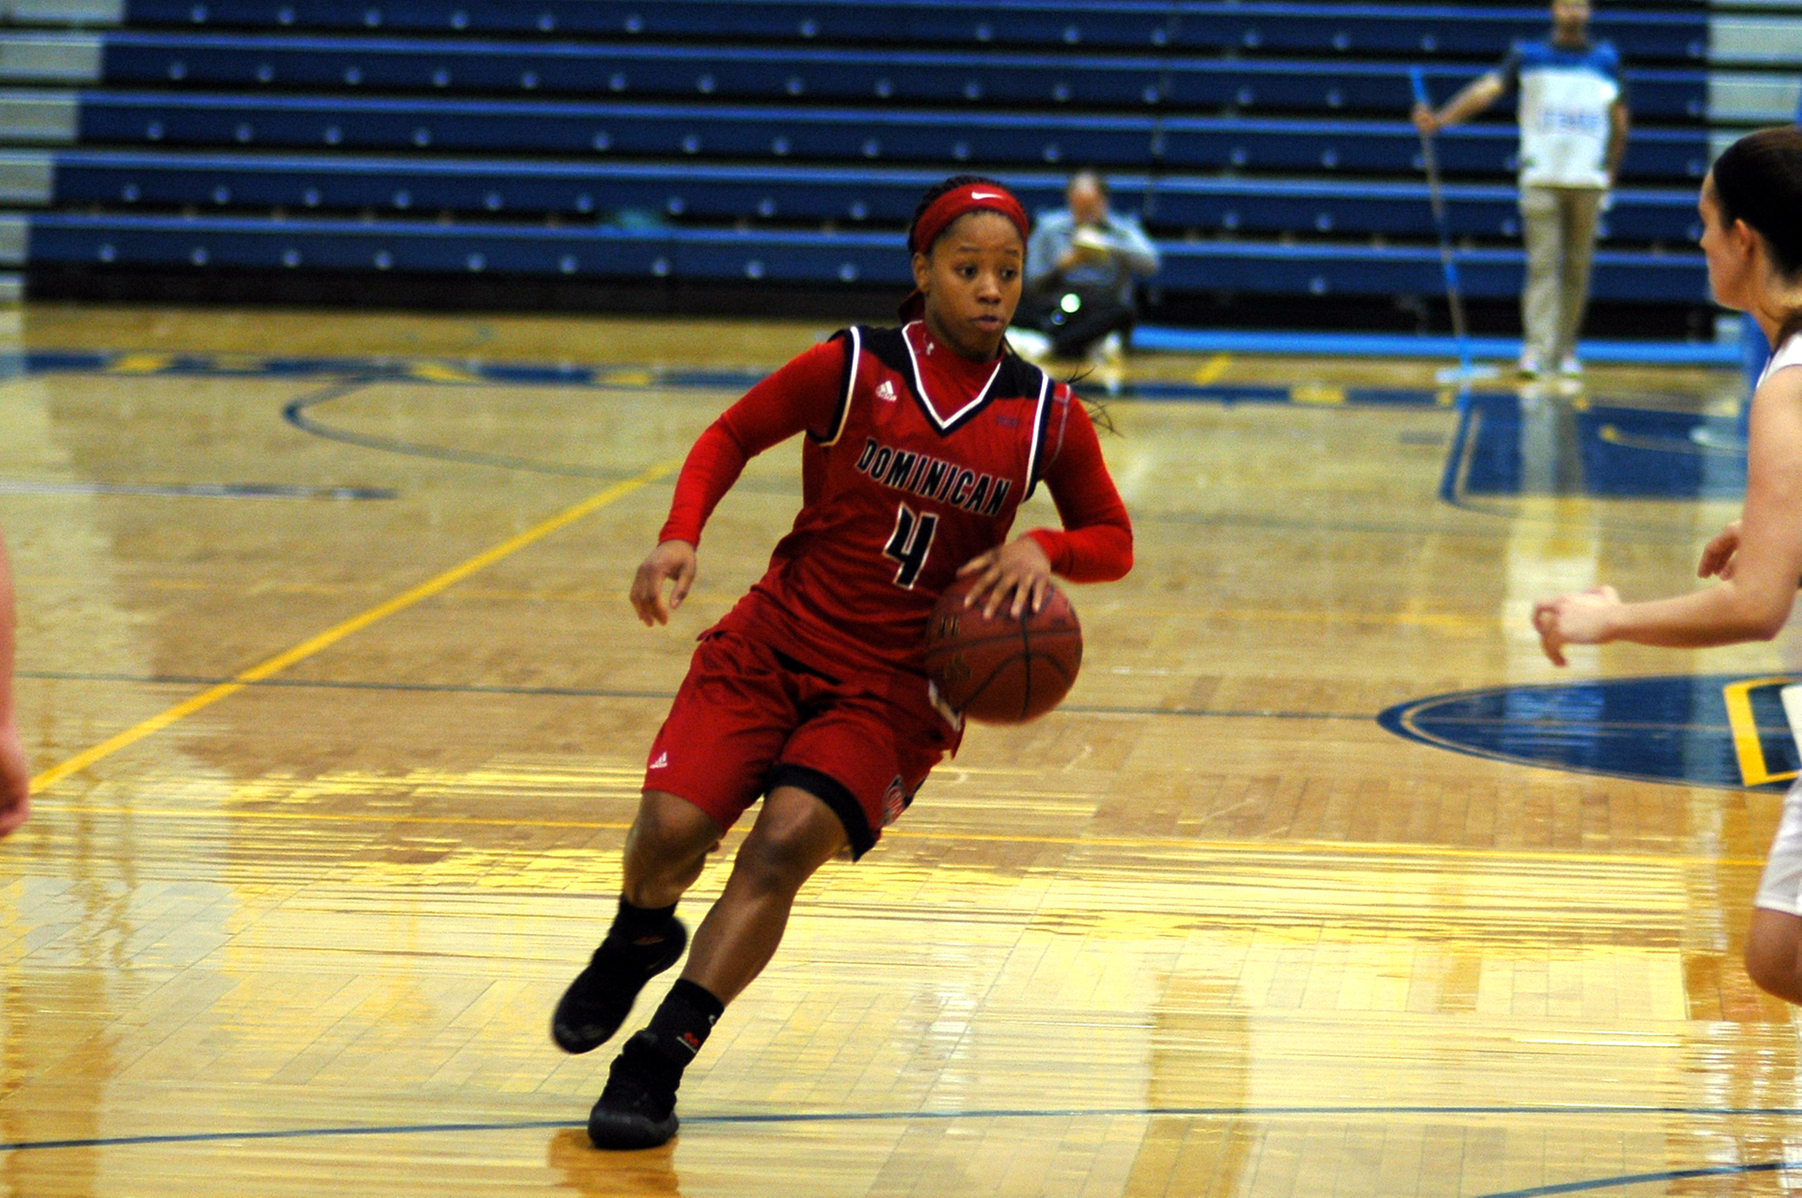 Freshman Kyla Ramseur who netted a career high 13 points tonight